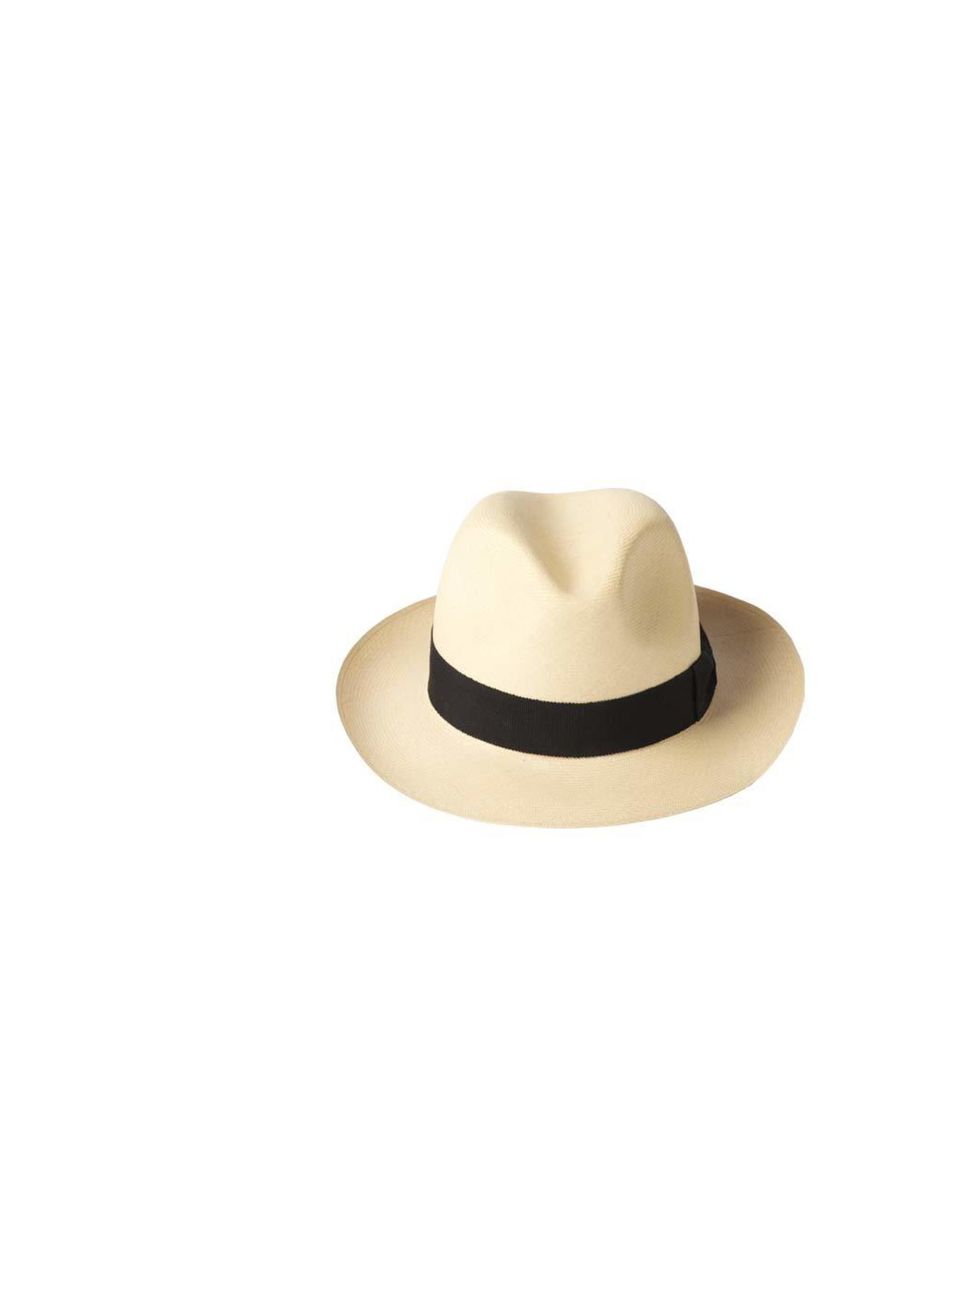 <p>A panama hat is versatile enough to wear with all of your festival outfits... which is lucky, as you'll need it to hide messy hair a few days in! My Bob hat, £120 at <a href="https://www.beachflamingo.com/my-bob-semi-bleached-classic-fedora/?Auth=52558